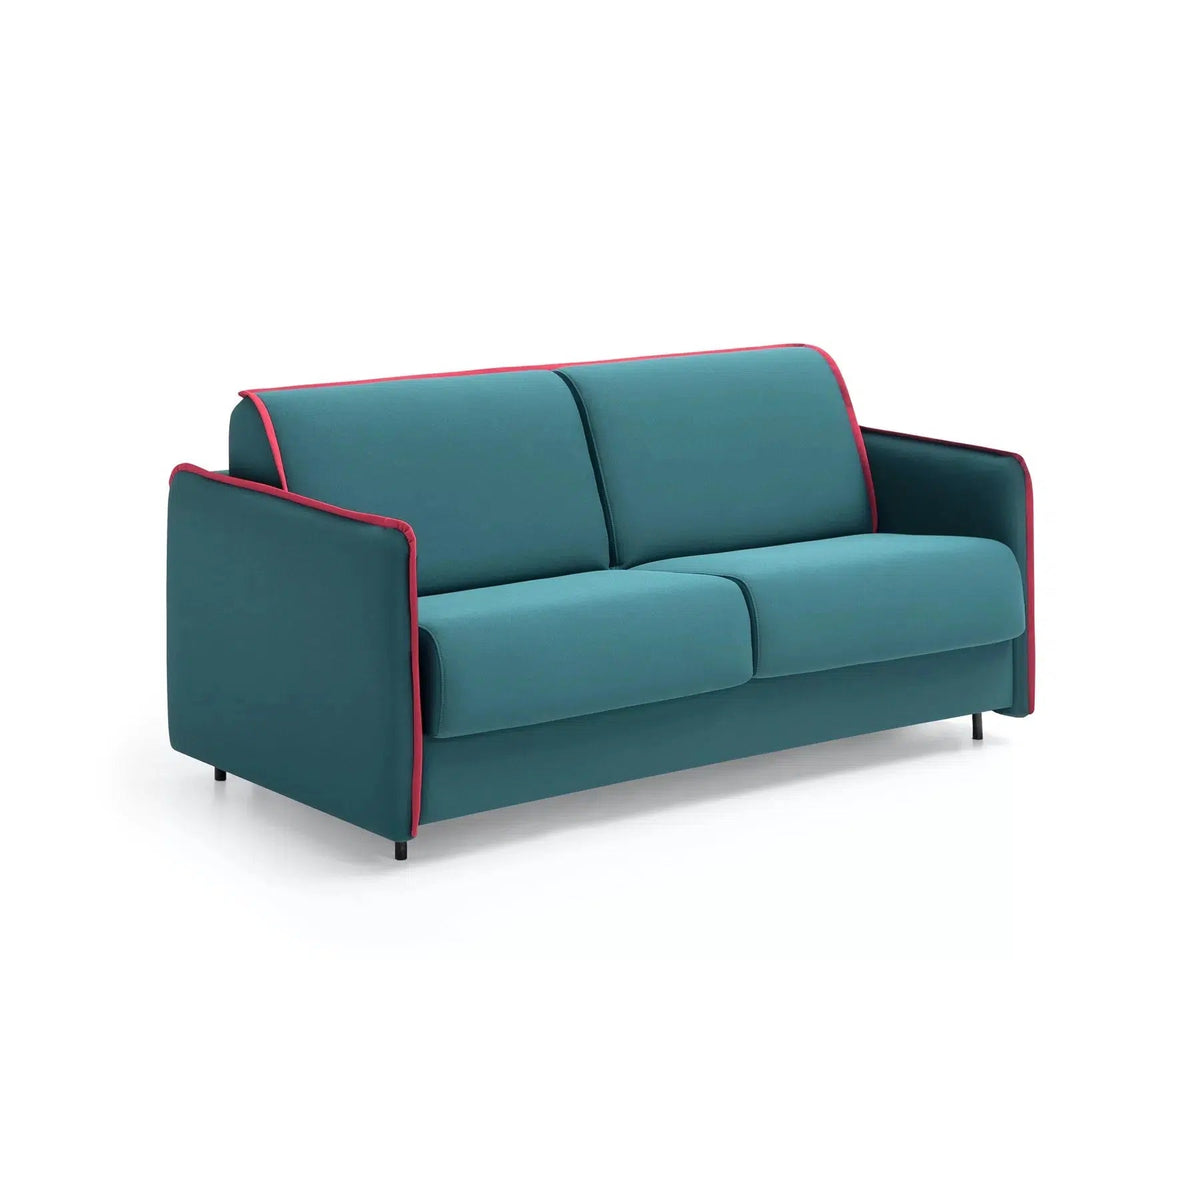 Mamba 910 Sofa Bed-TM Leader-Contract Furniture Store